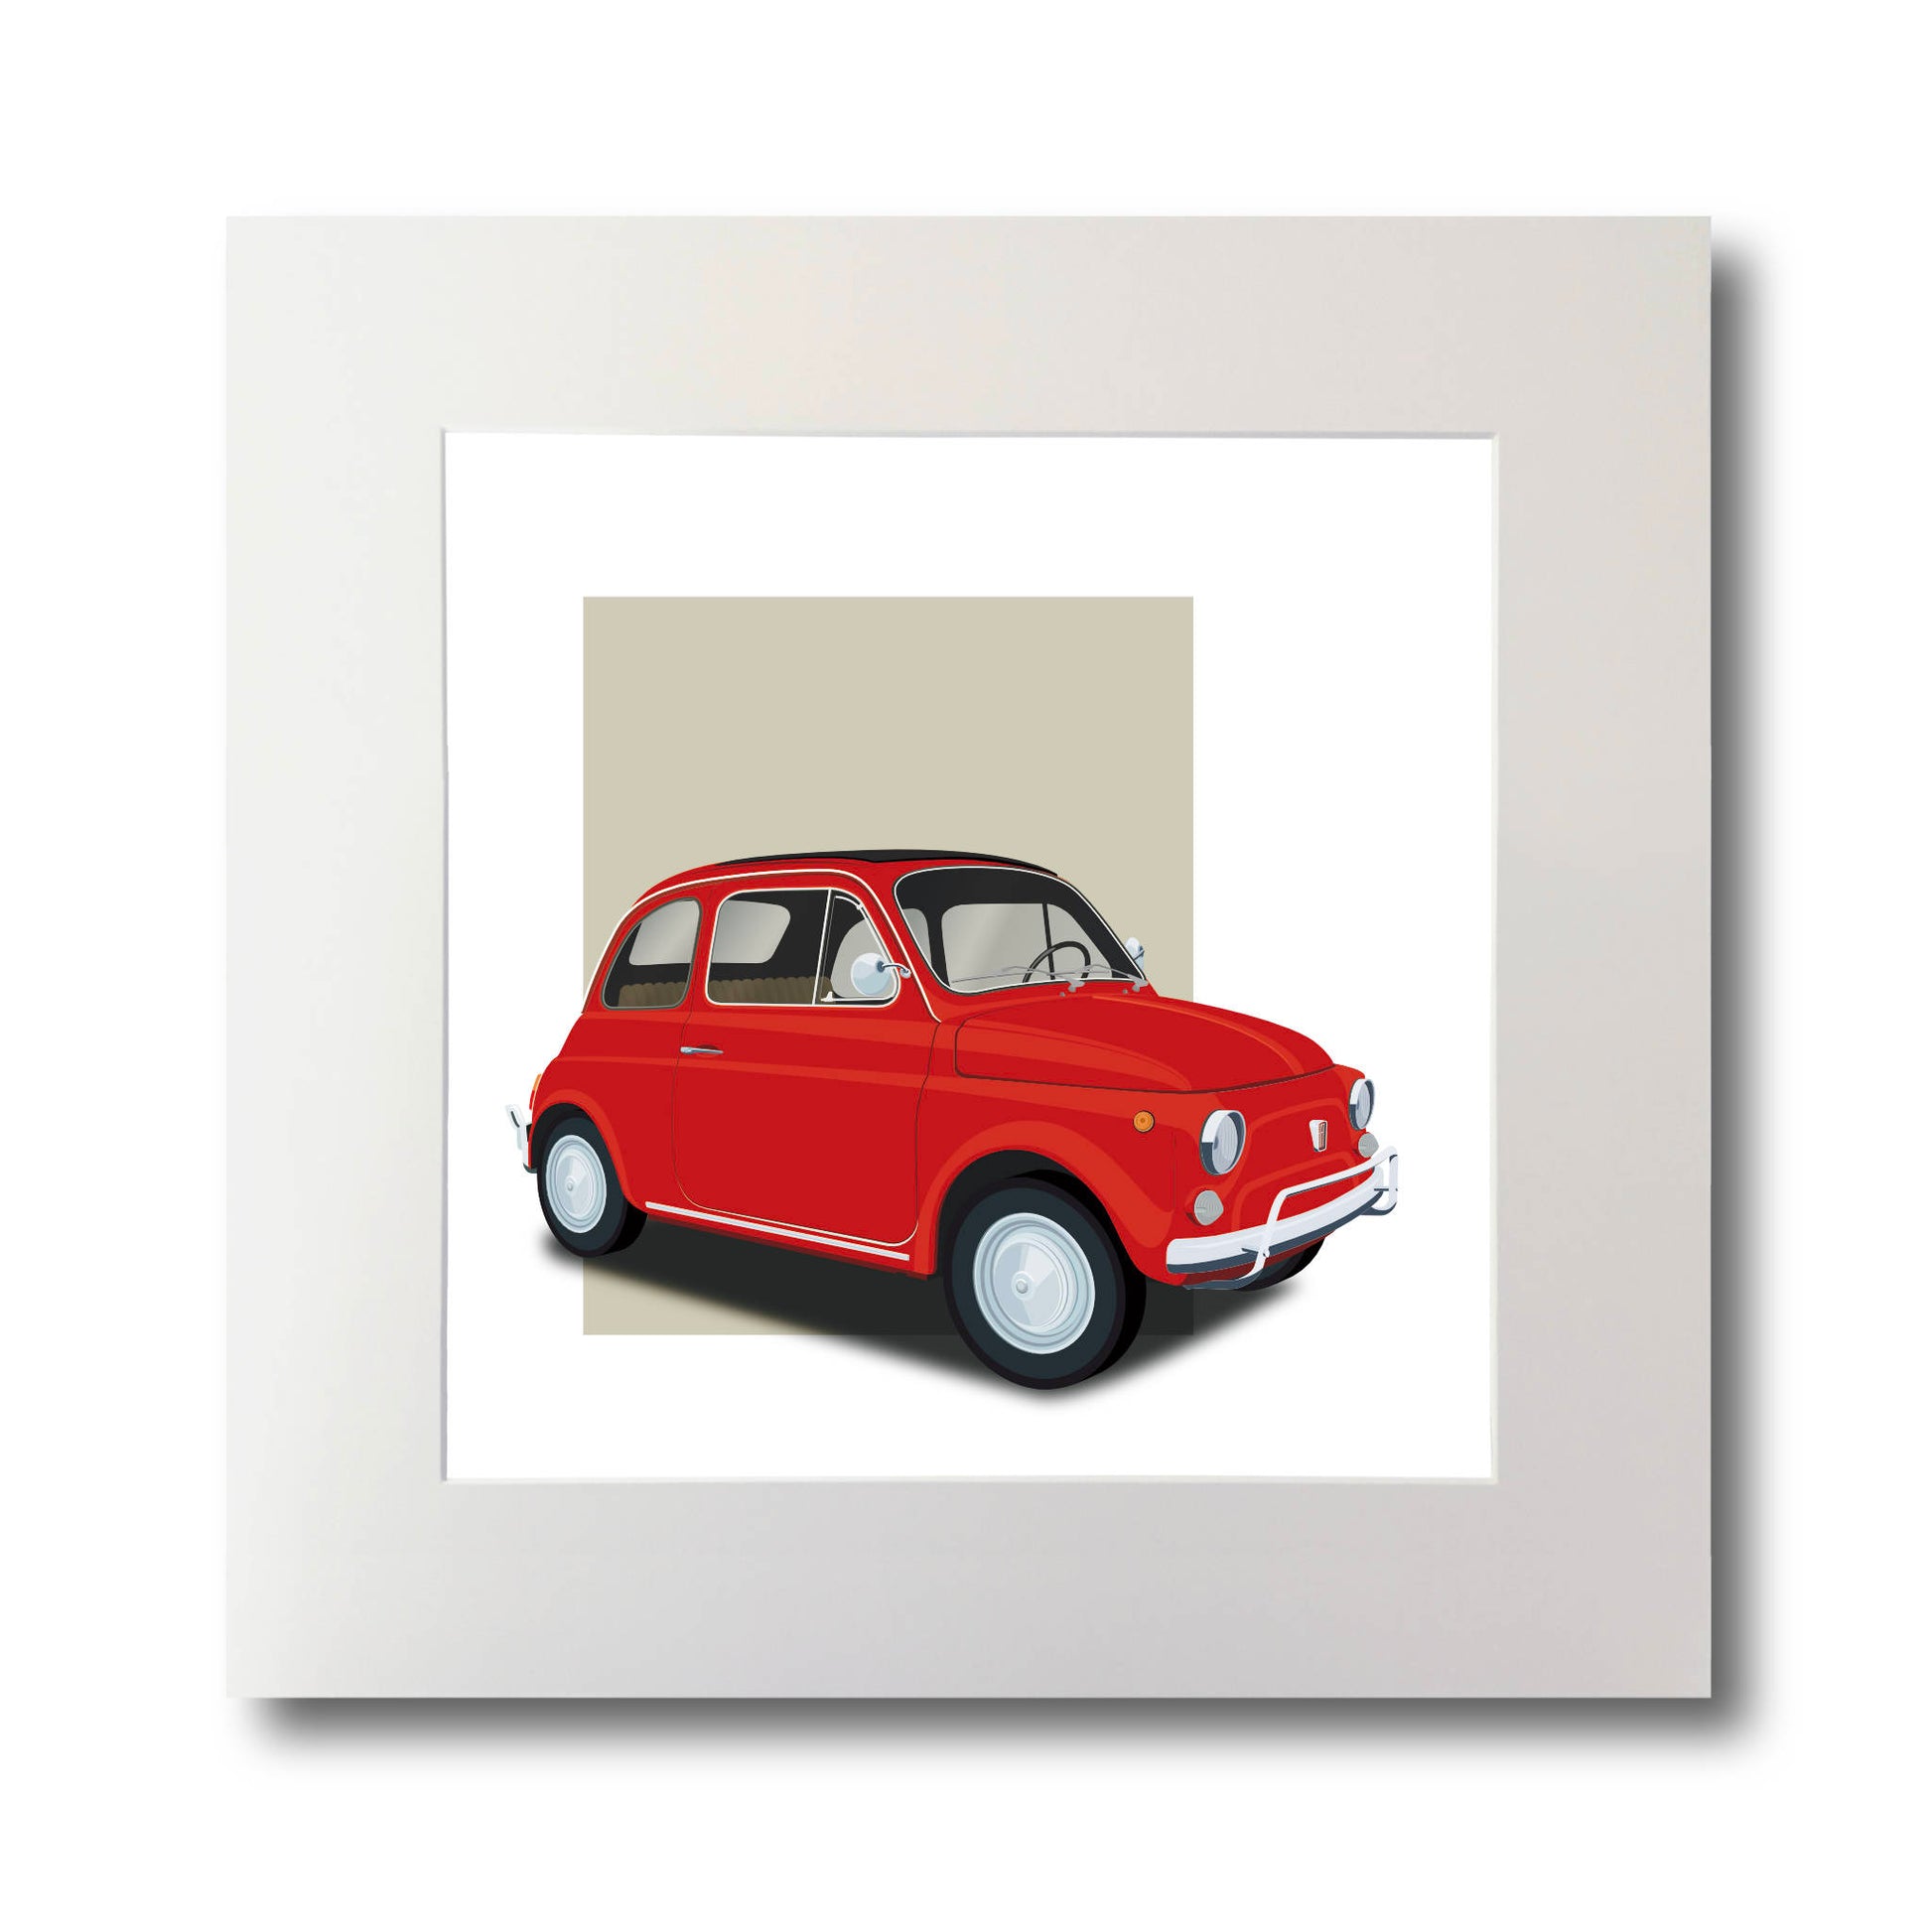 Modern illustration of the classic 1960s Fiat 500 Cinquecento in gorgeous red with dark background, measuring 30 x 30cm